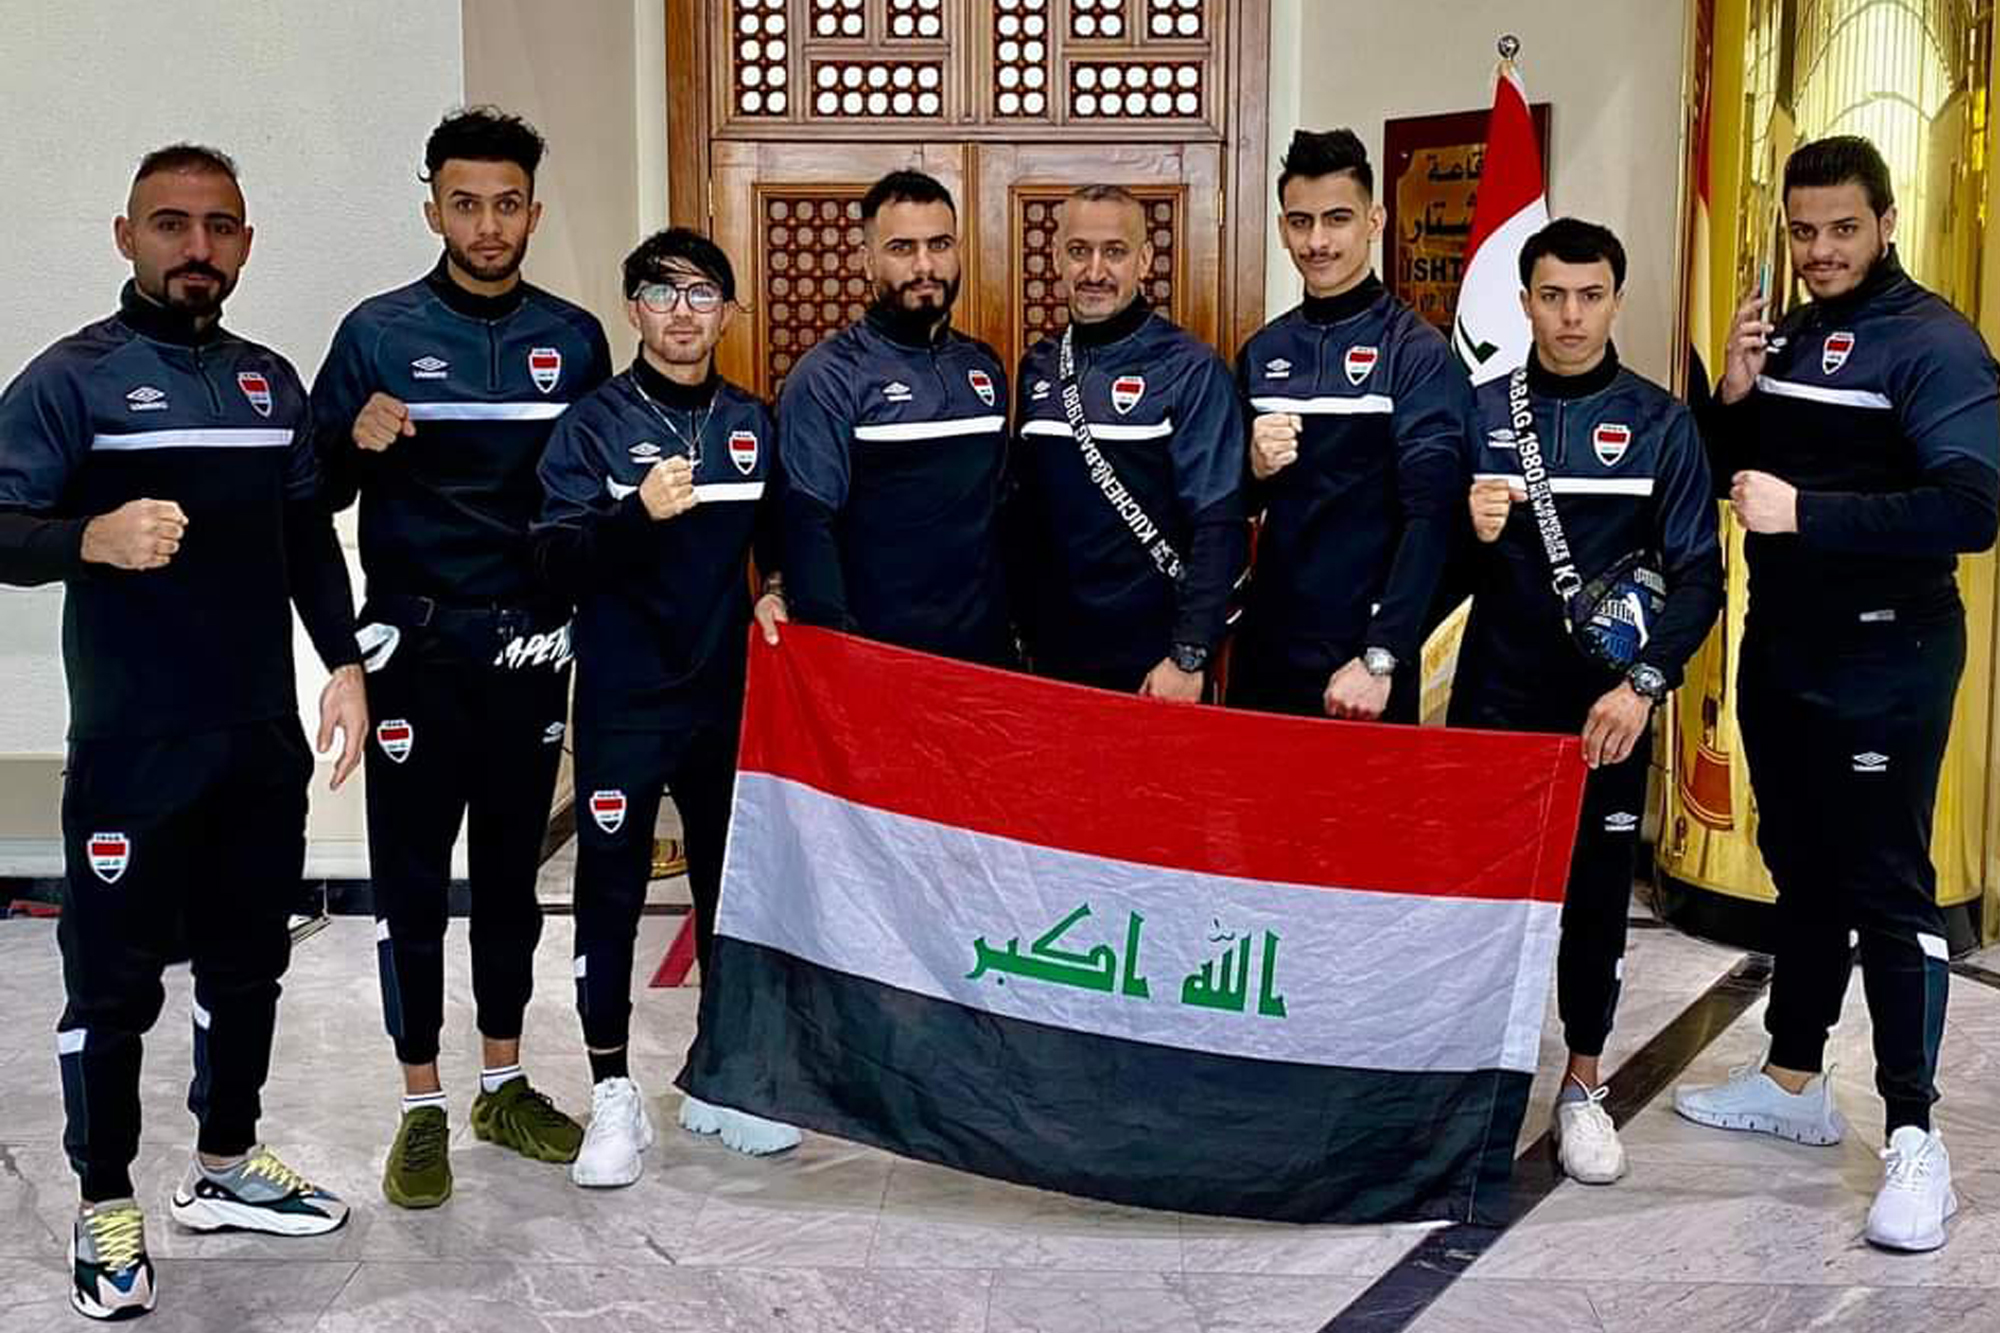 IMMAF World Championships debut “a dream come true” for the Iraqi MMA Federation